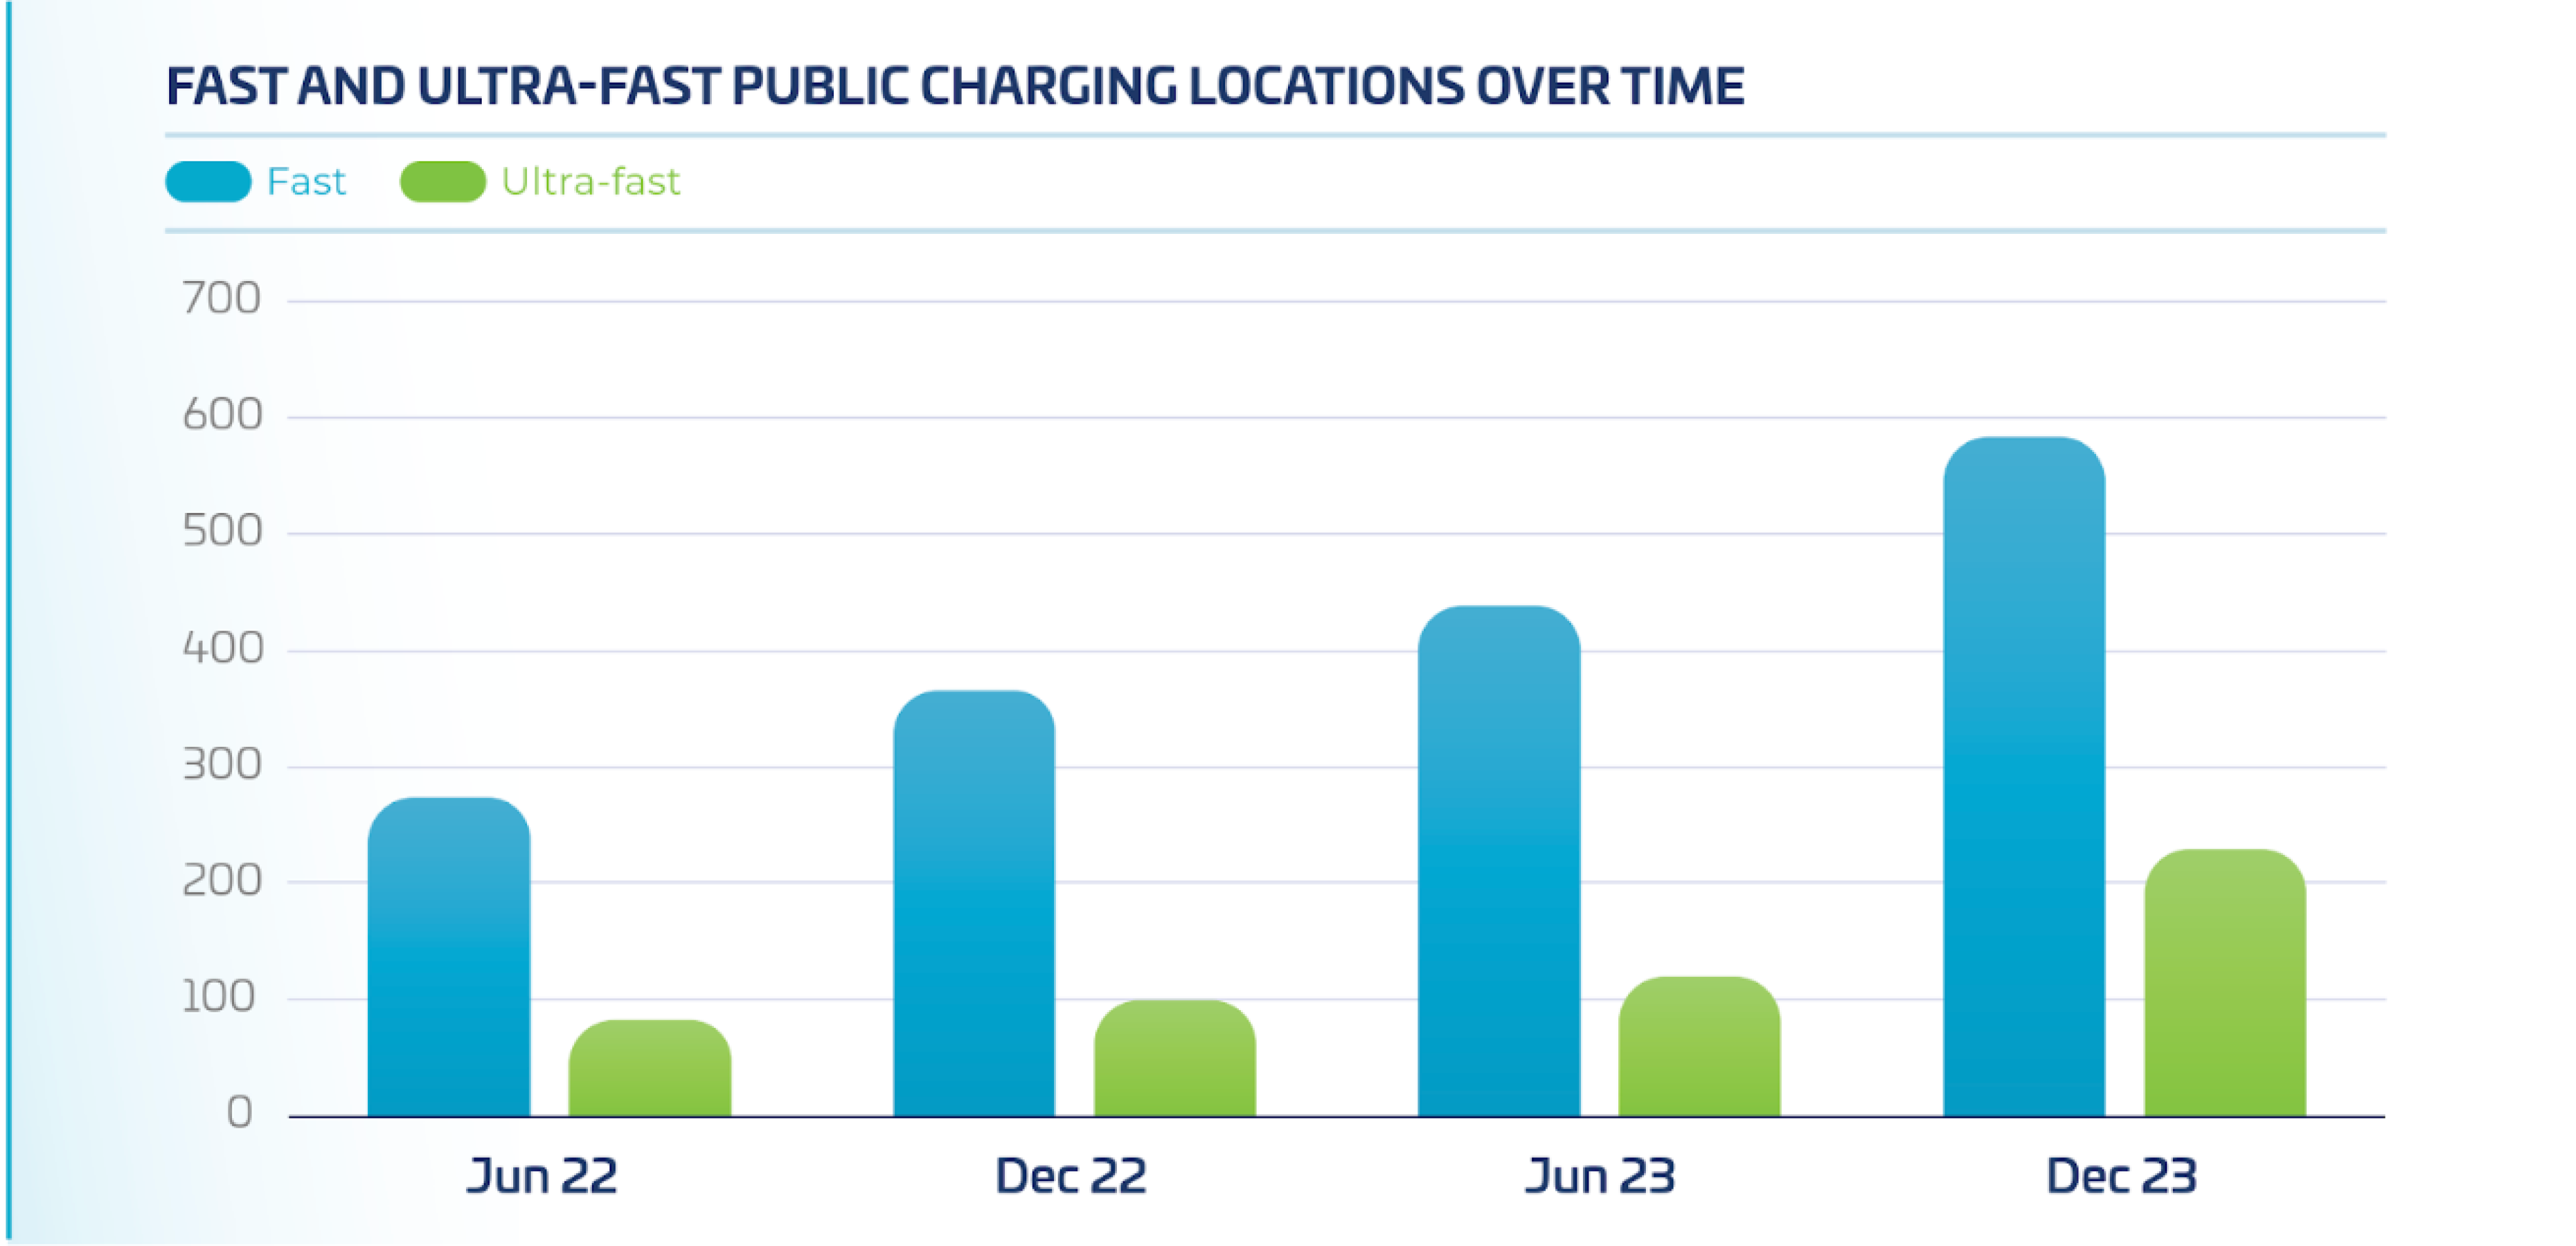 085c1d81/fast and ultra fast public charging locations over time png